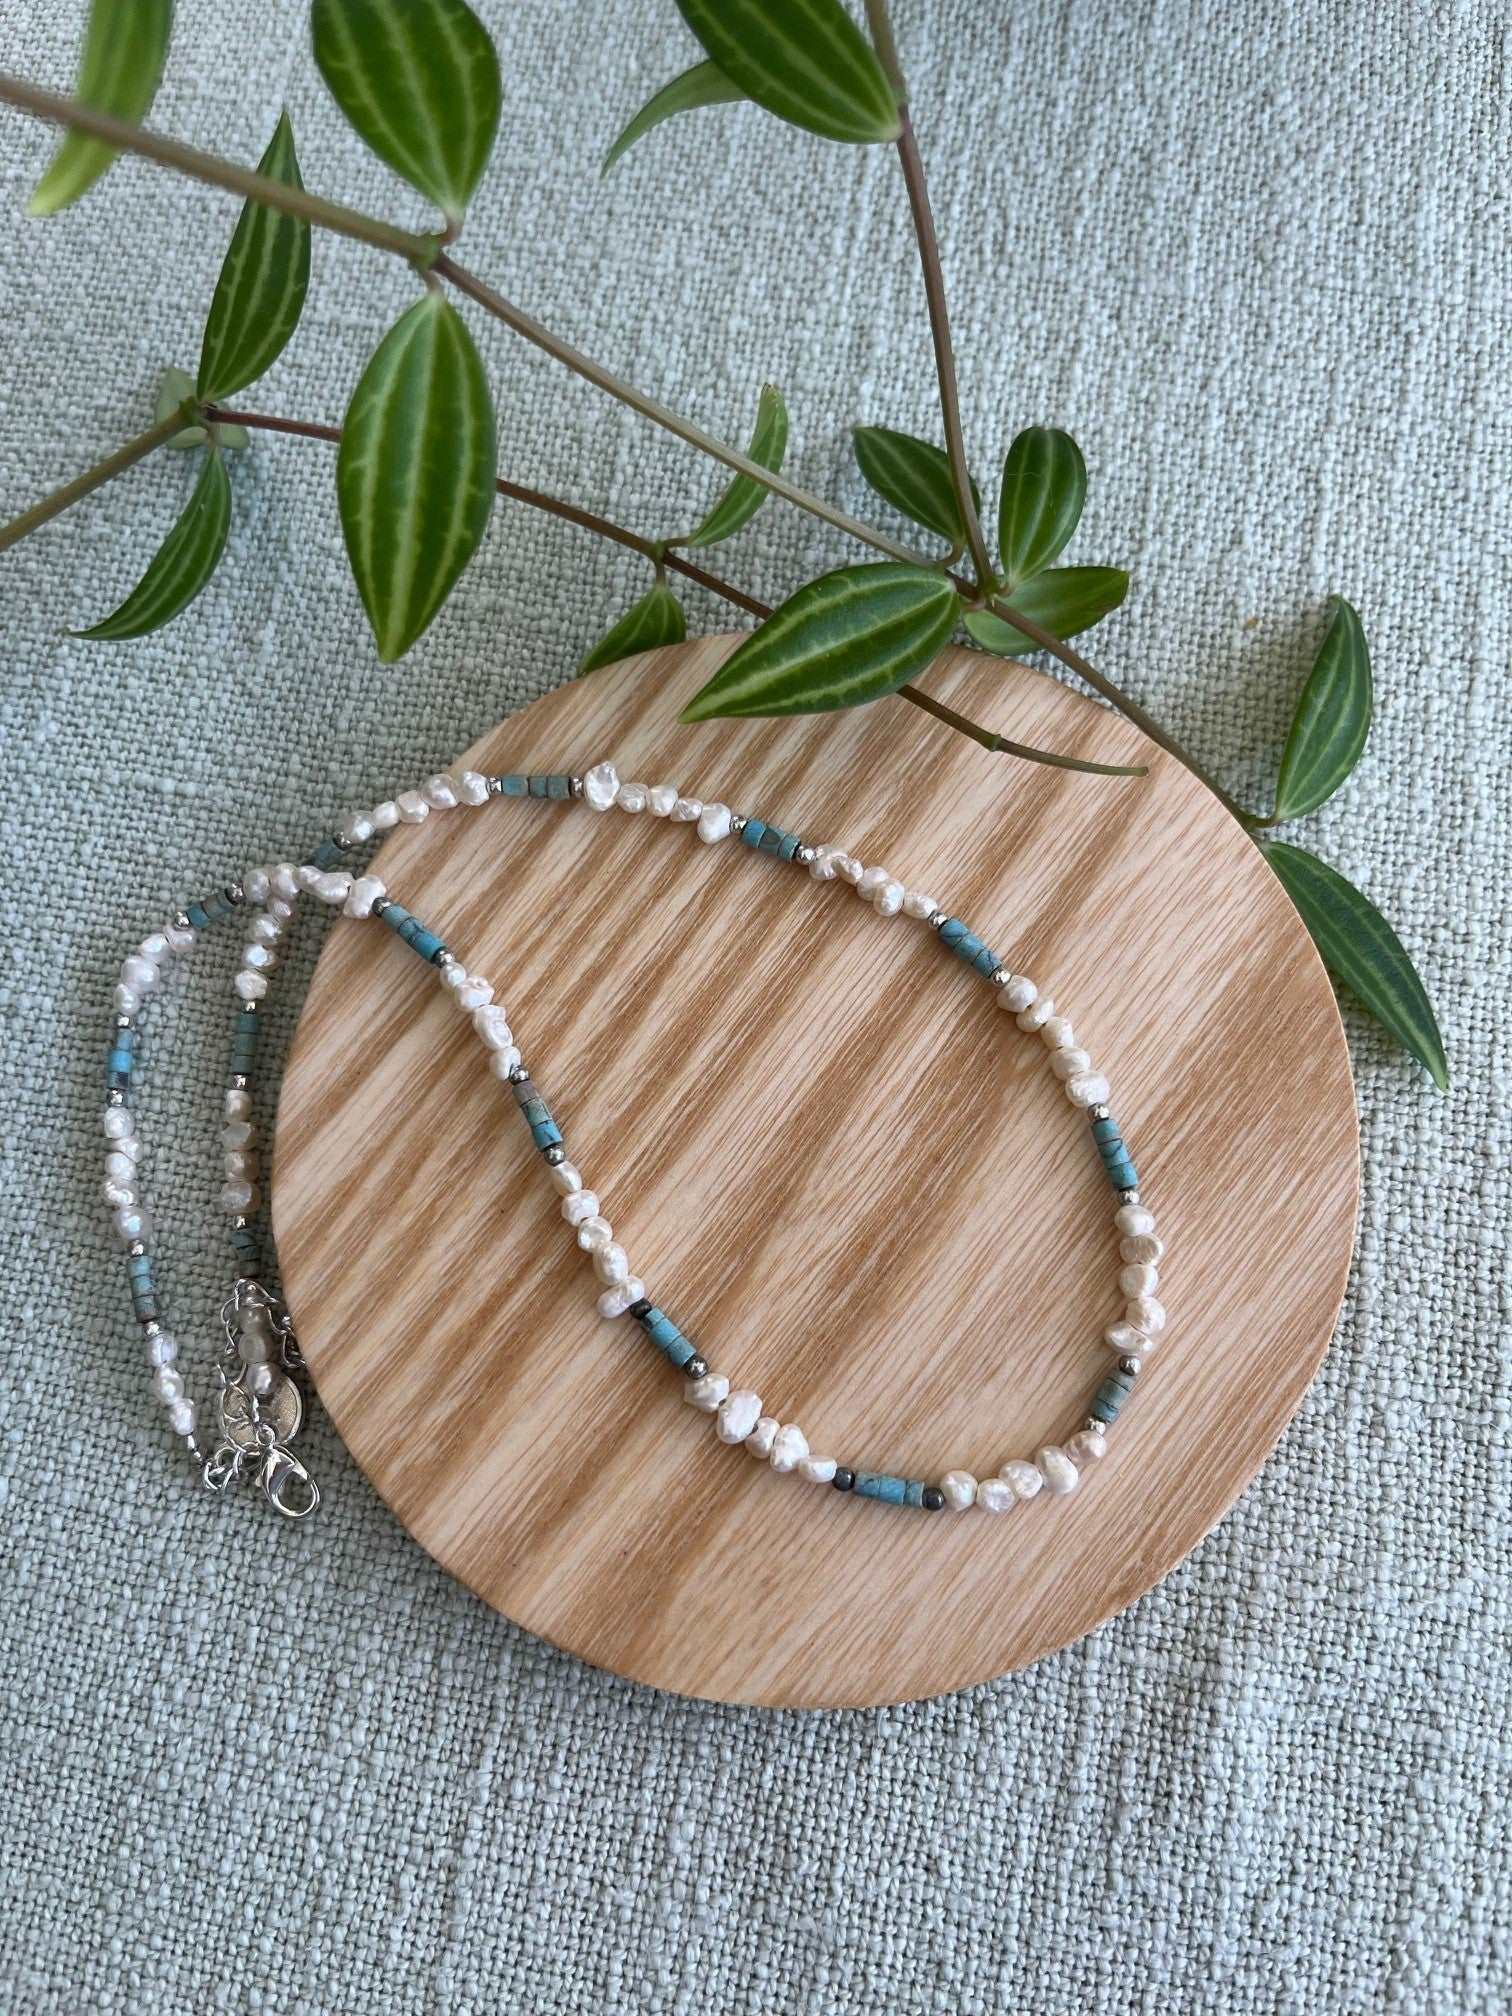 Turquoise Pearl Choker Necklace or Wrap Bracelet